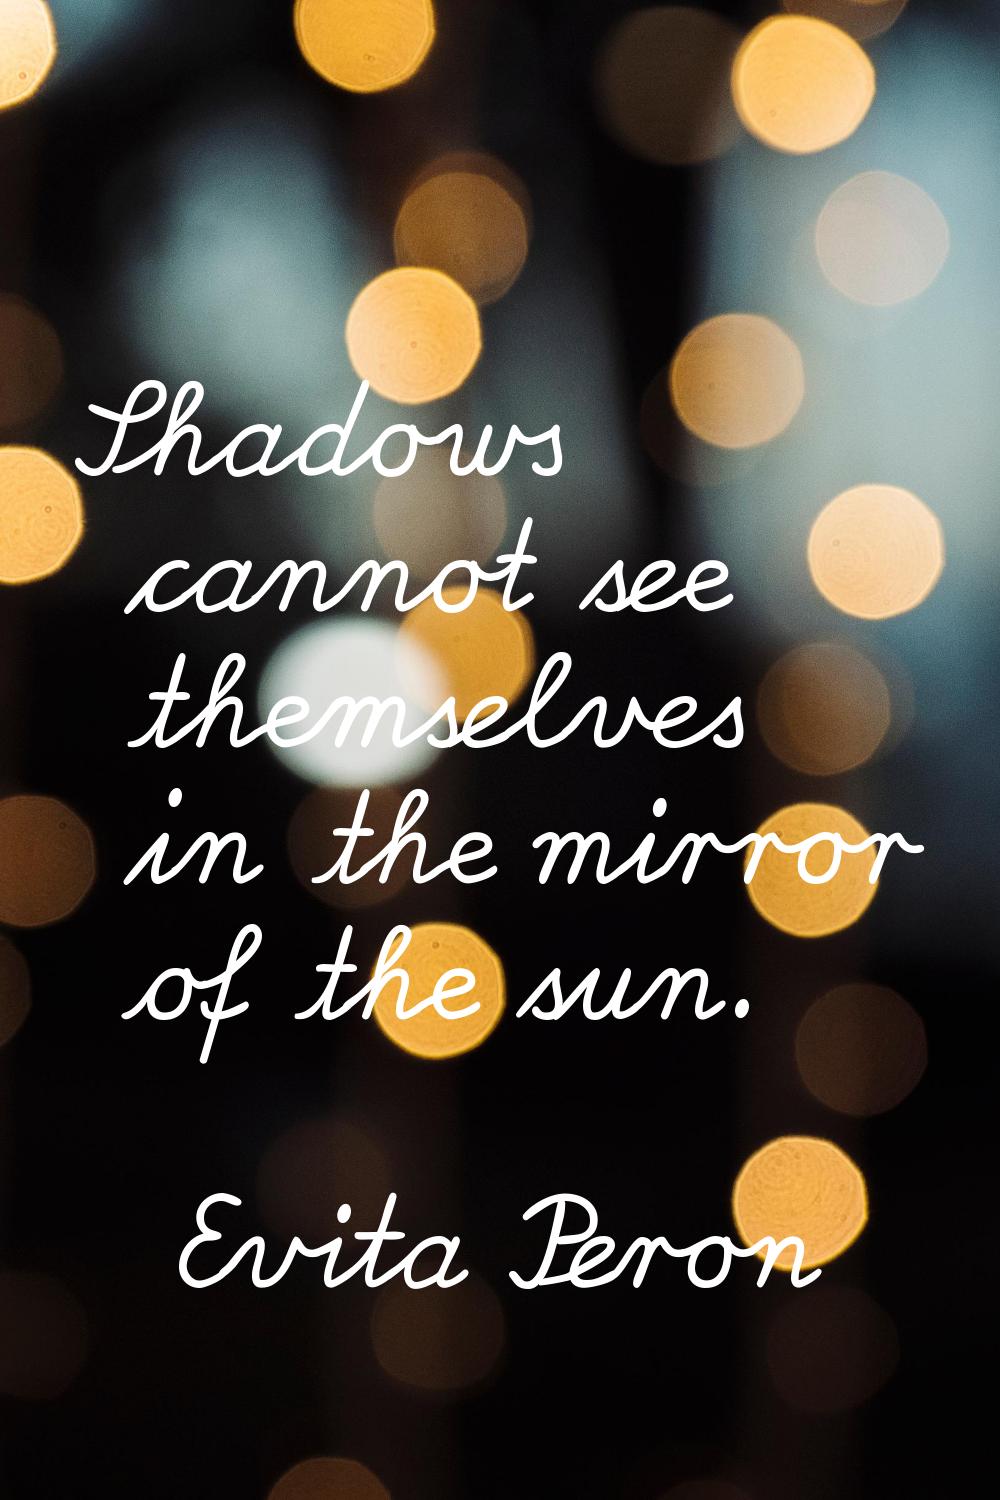 Shadows cannot see themselves in the mirror of the sun.